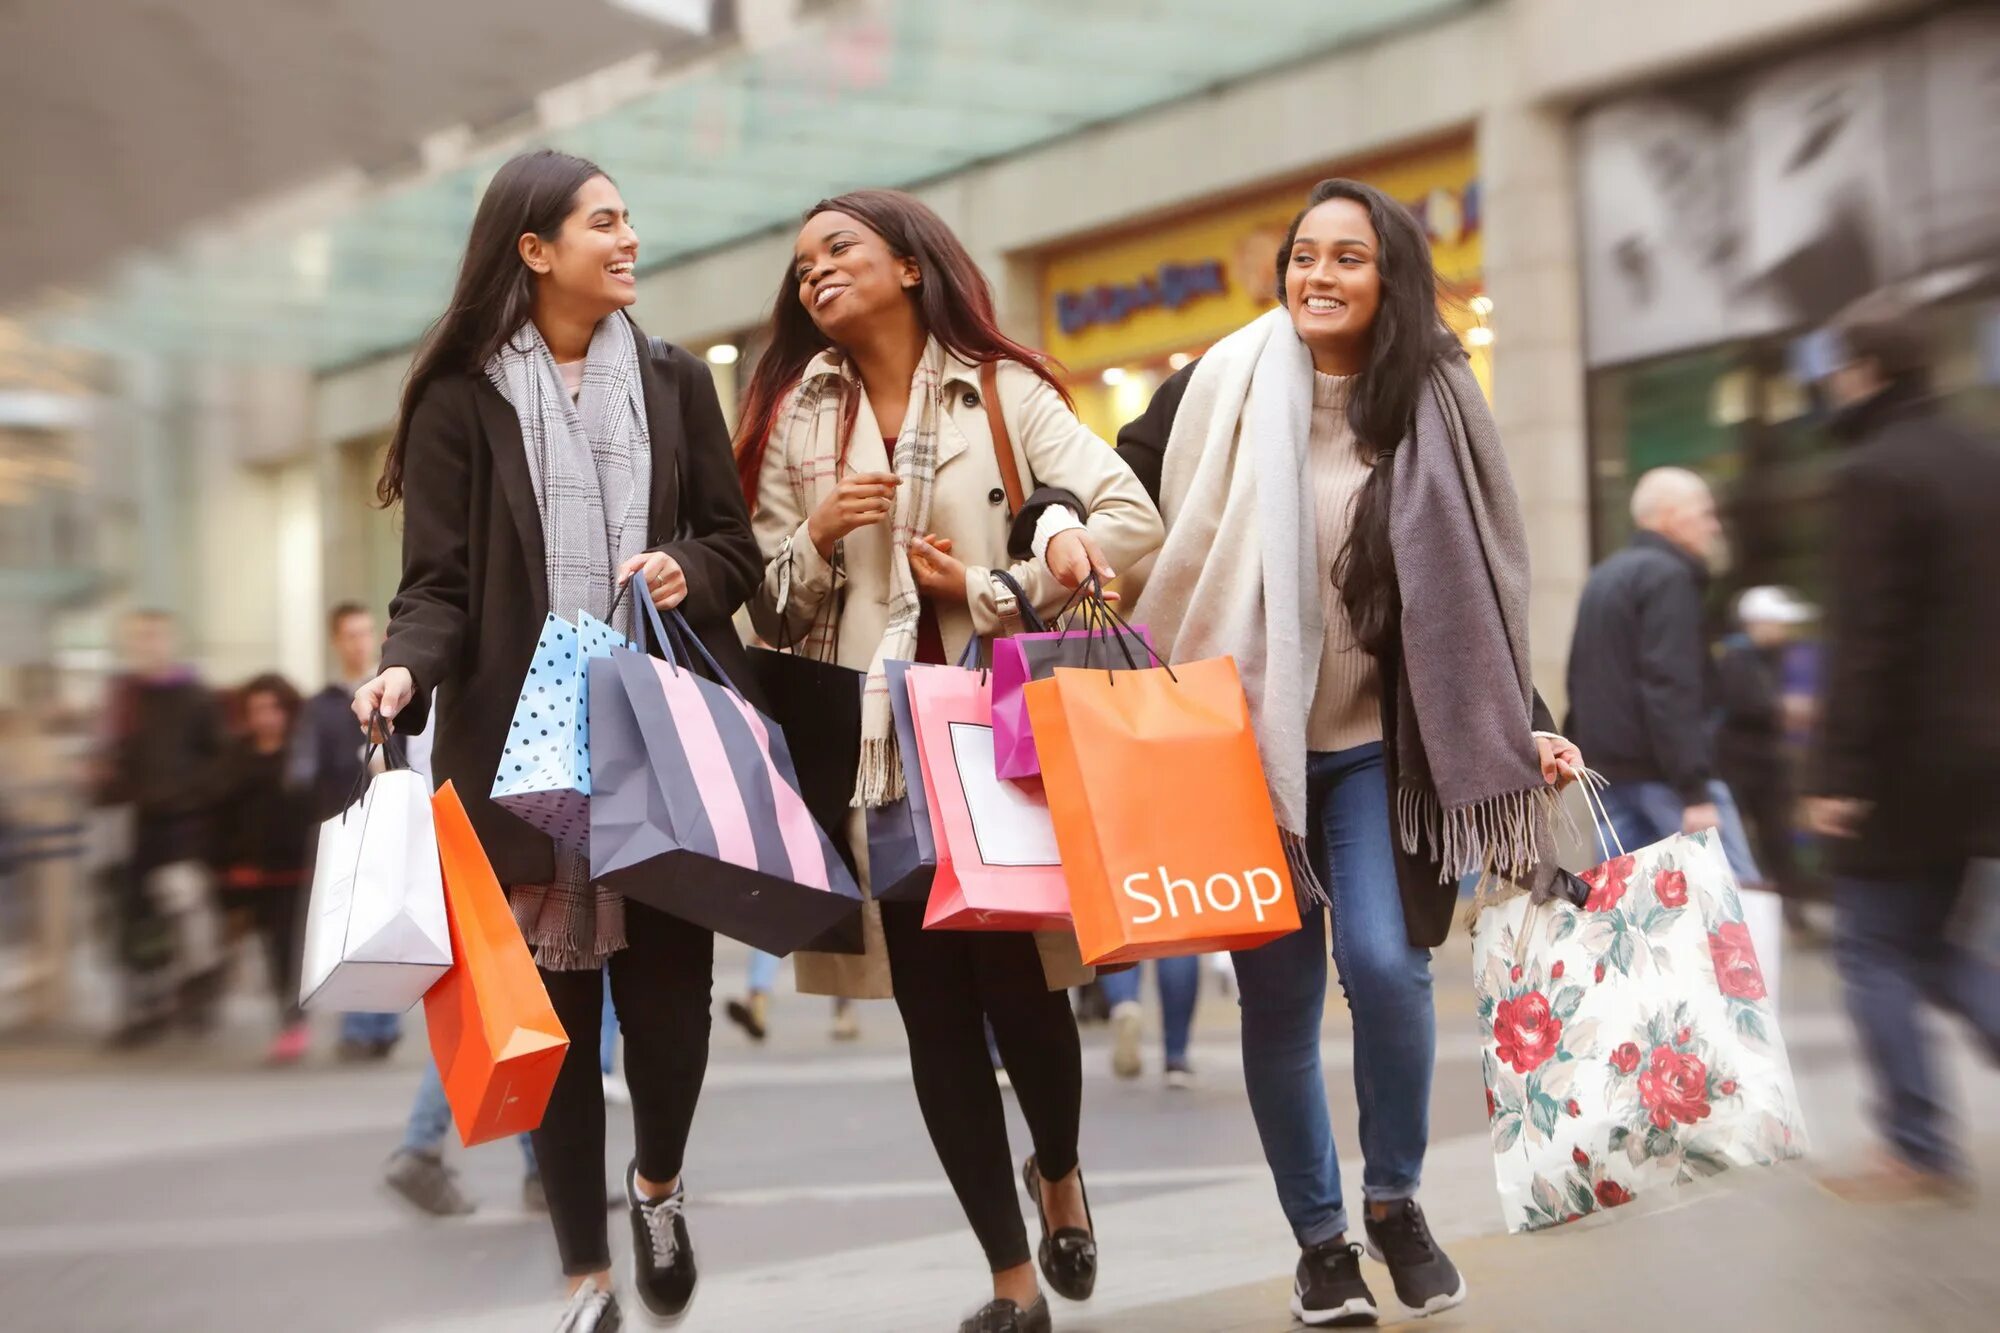 L go shopping. 1- She’ll go shopping in Town …. Consumer confidence.